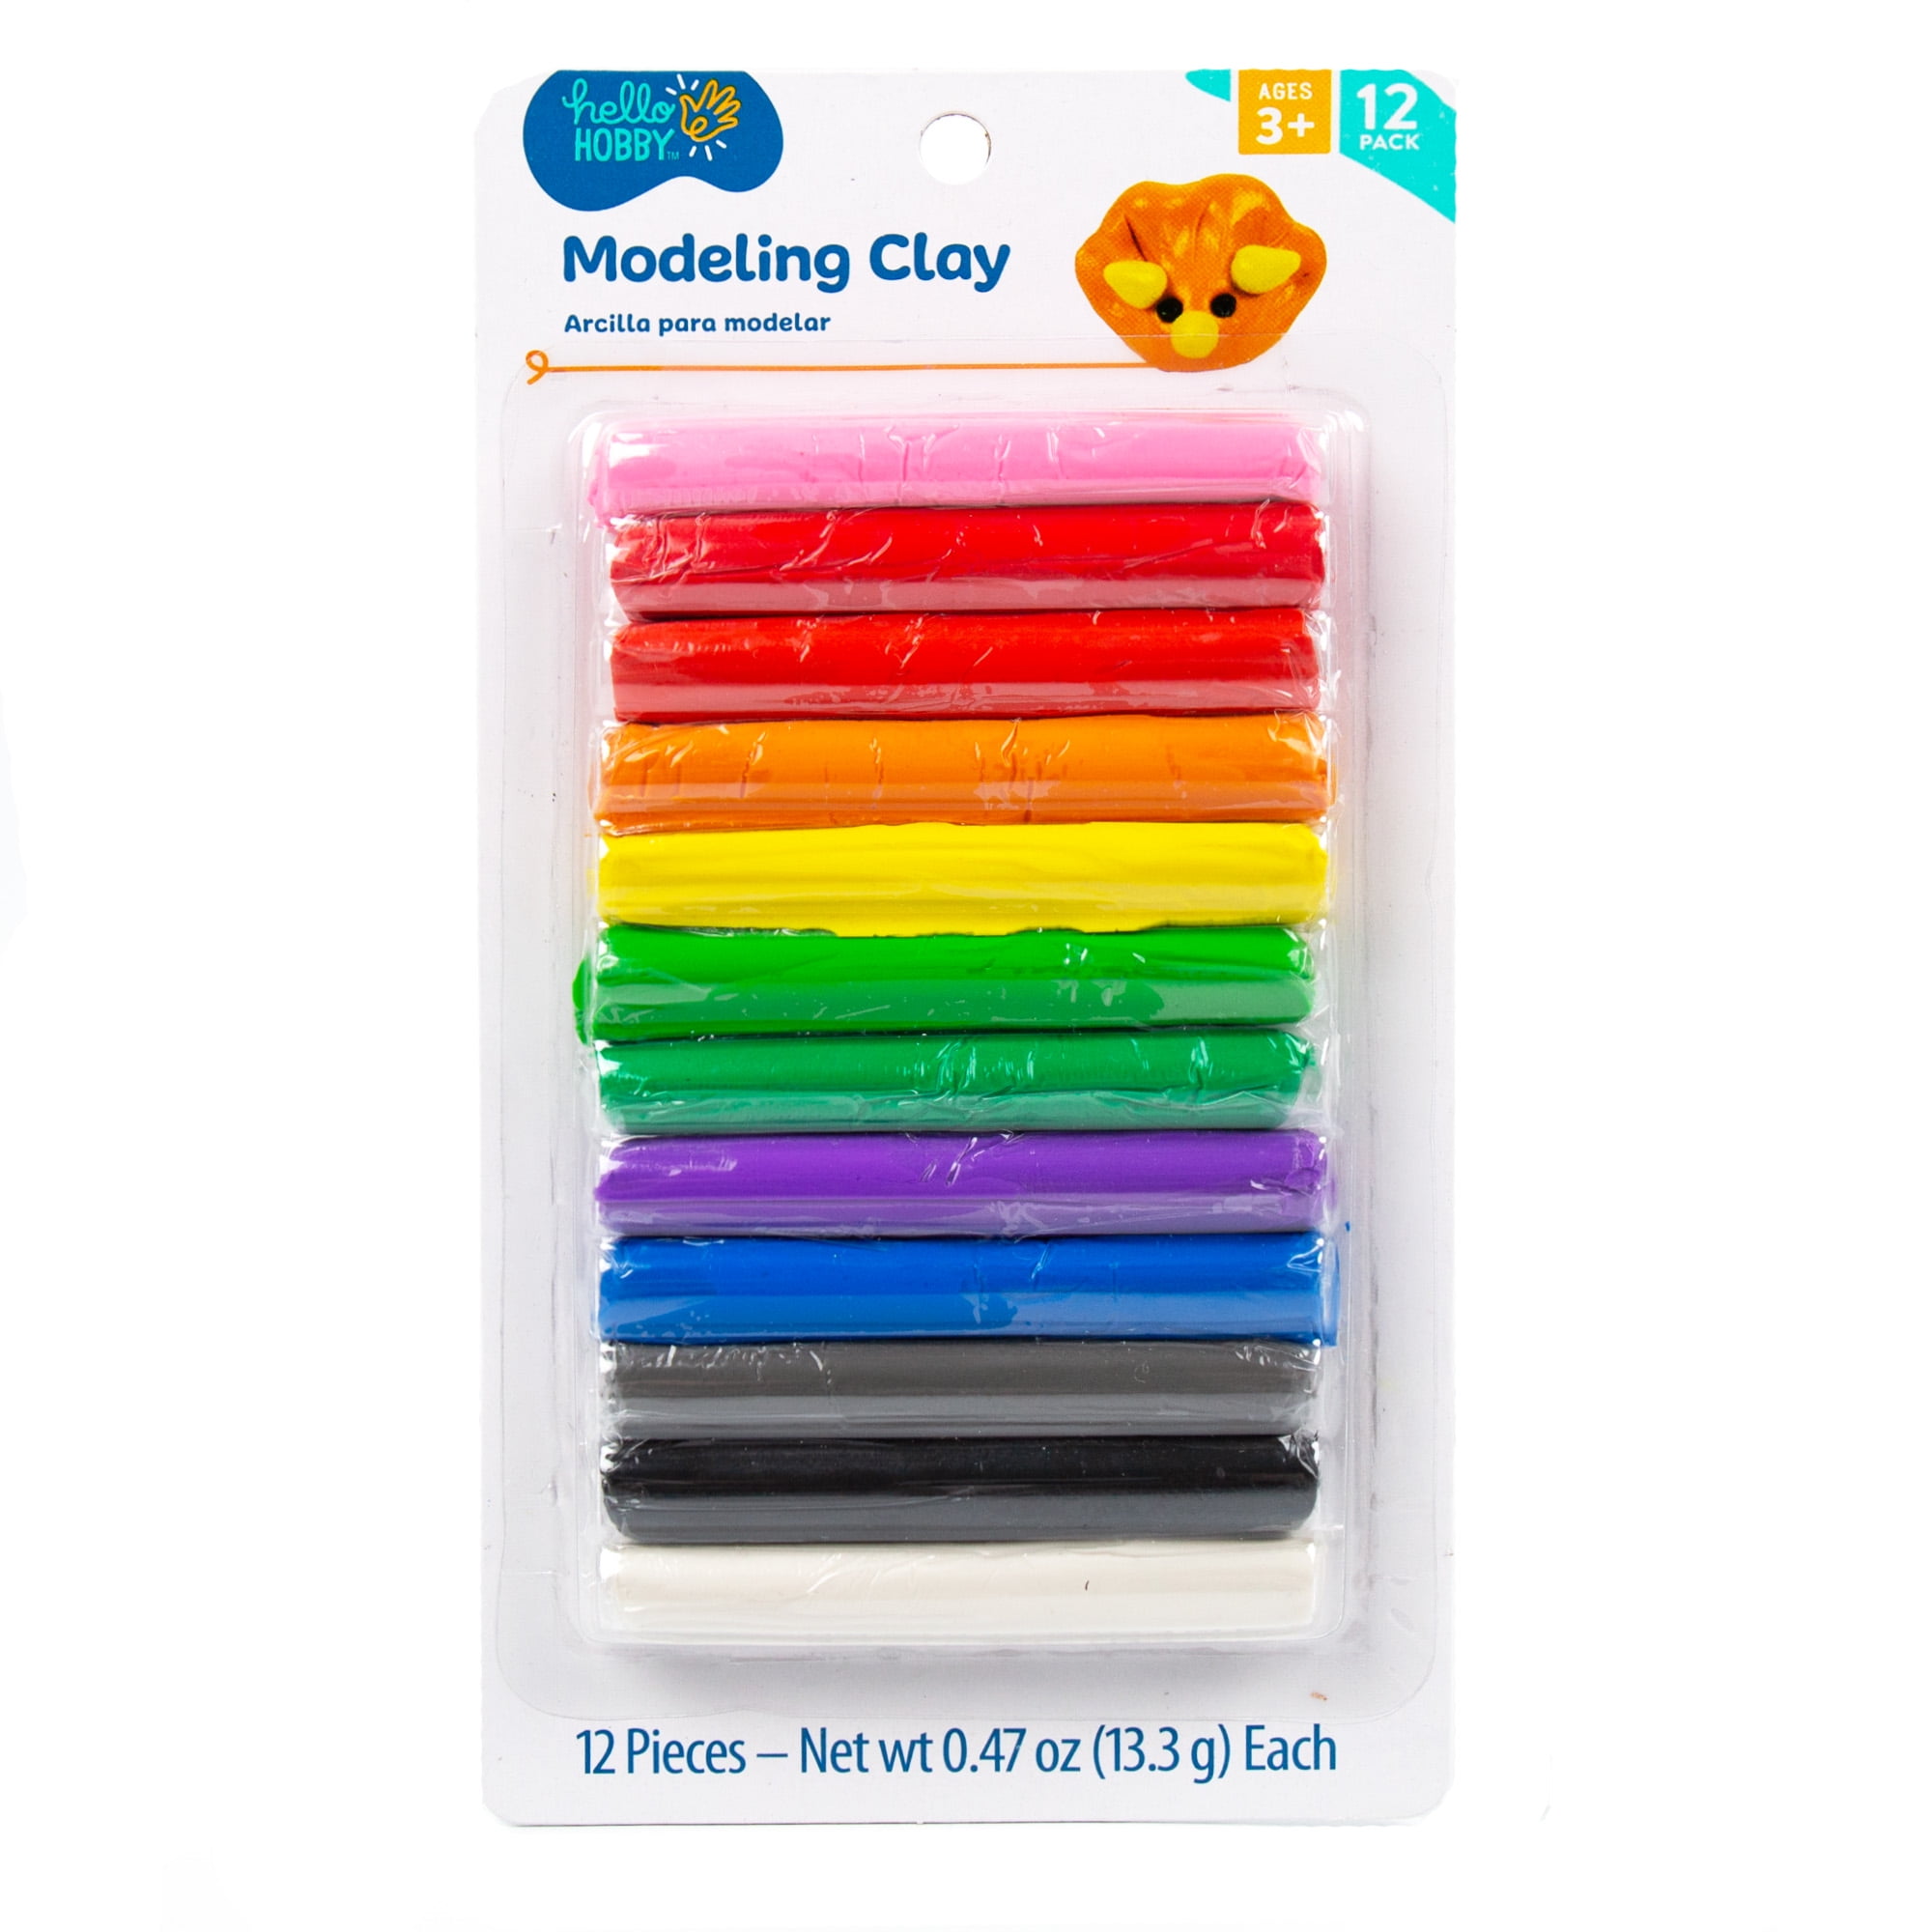 BAZIC 9.17 oz (260g) 9 Color Modeling Clay Sticks Bazic Products